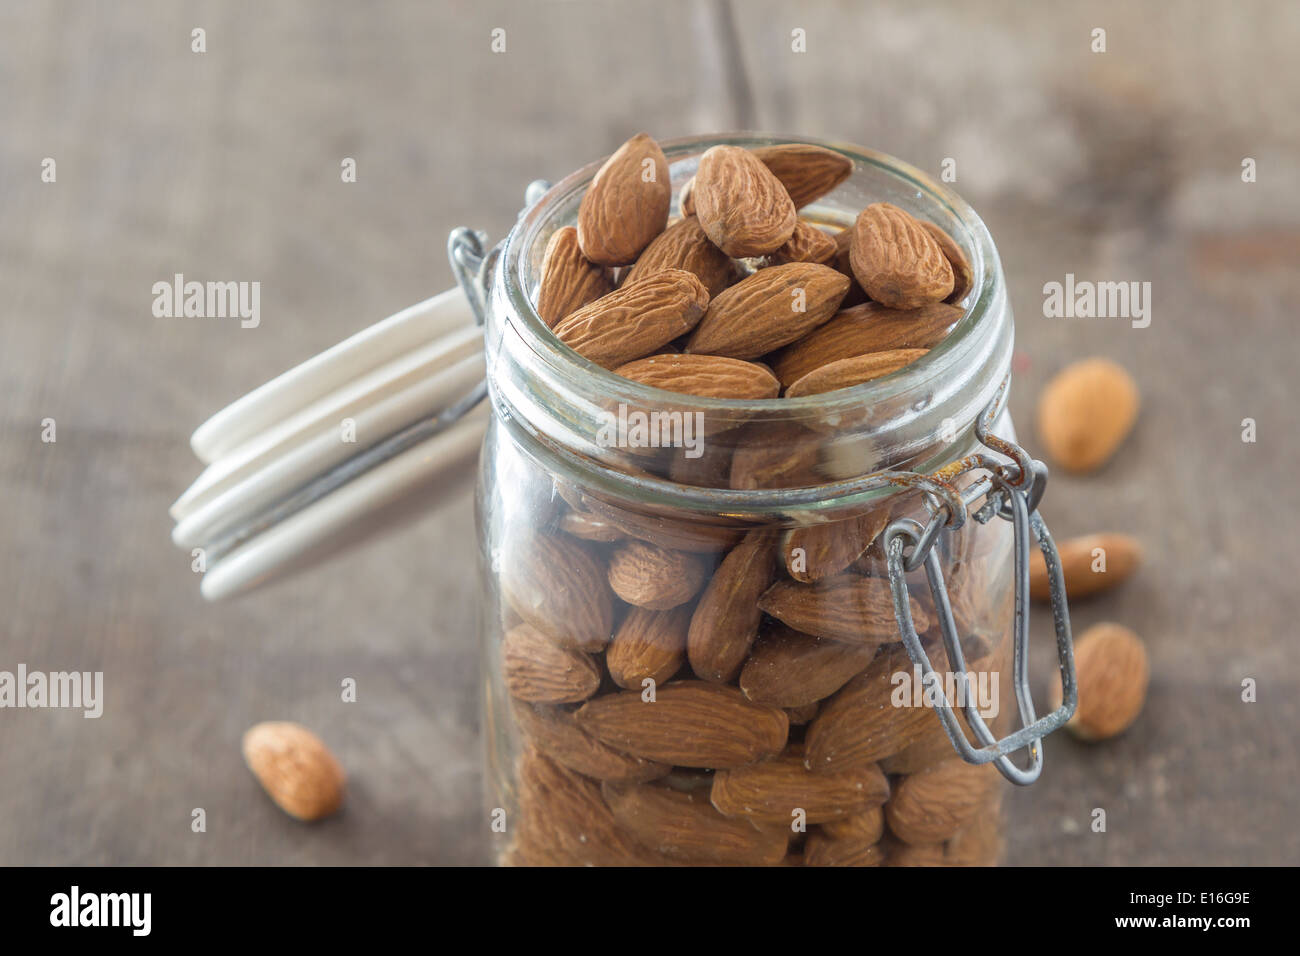 almonds in a jar on a wooden table Stock Photo